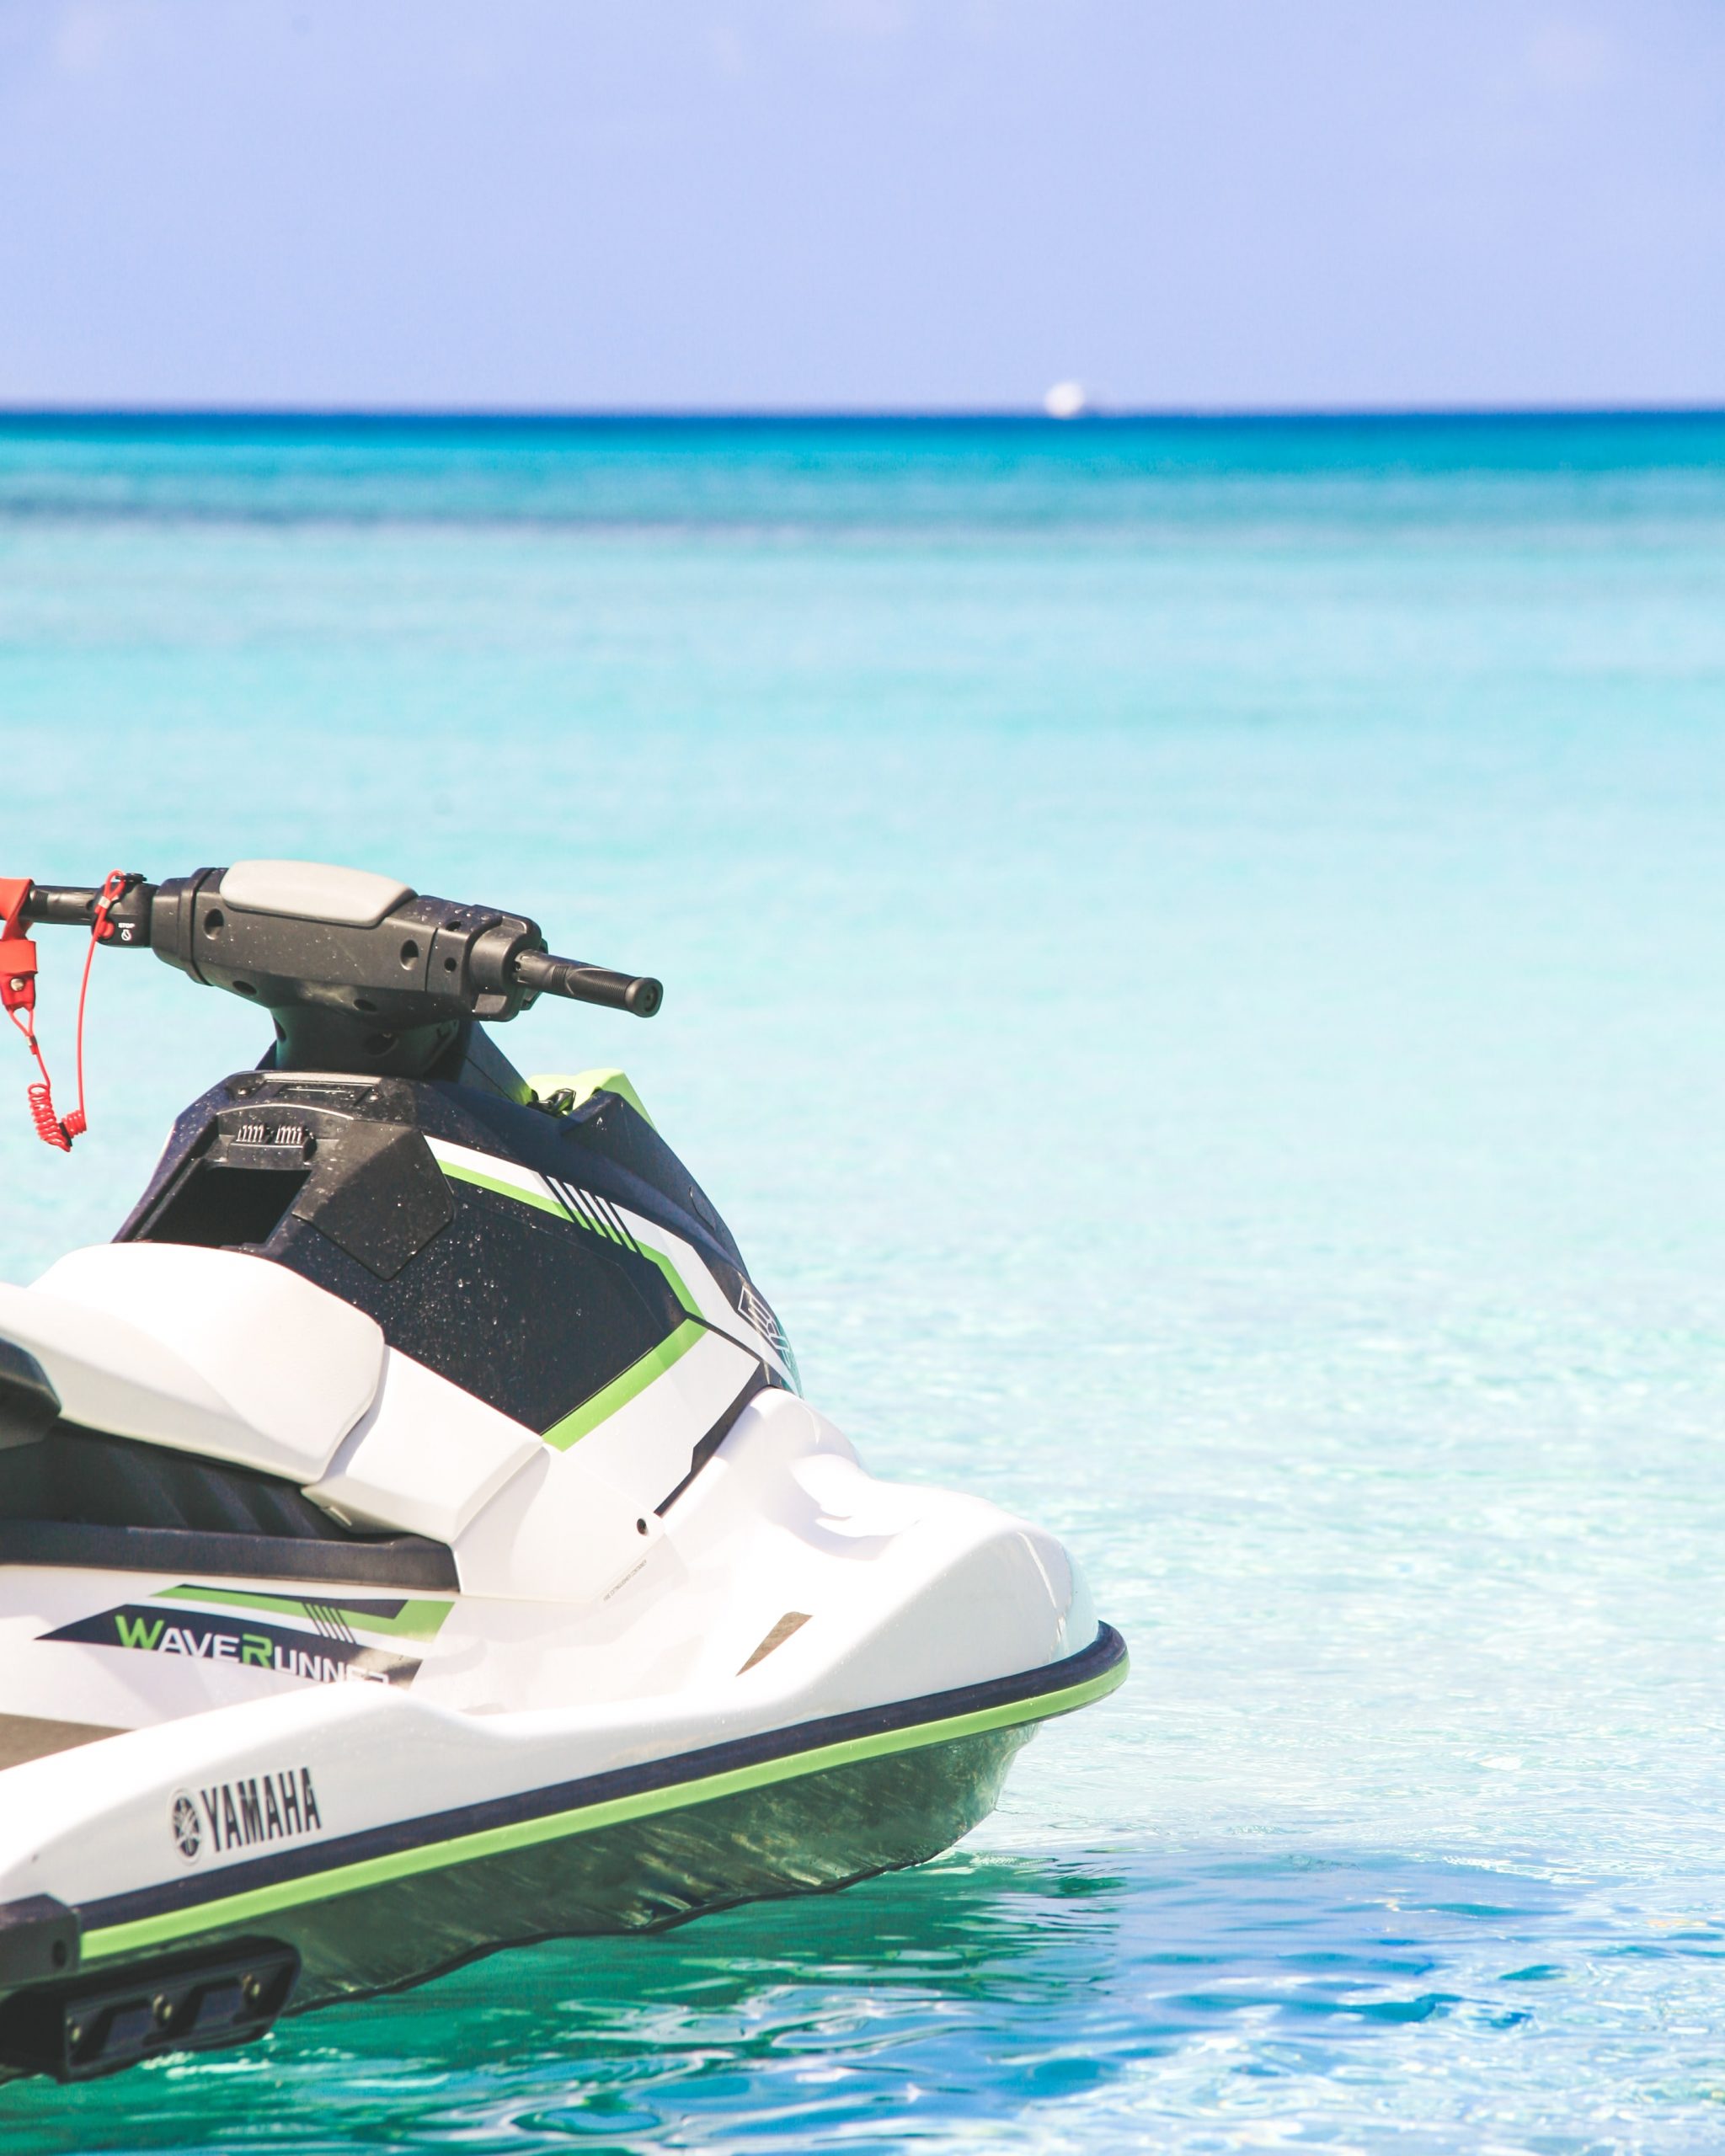 Destinations To Travel With Your Jet-Ski